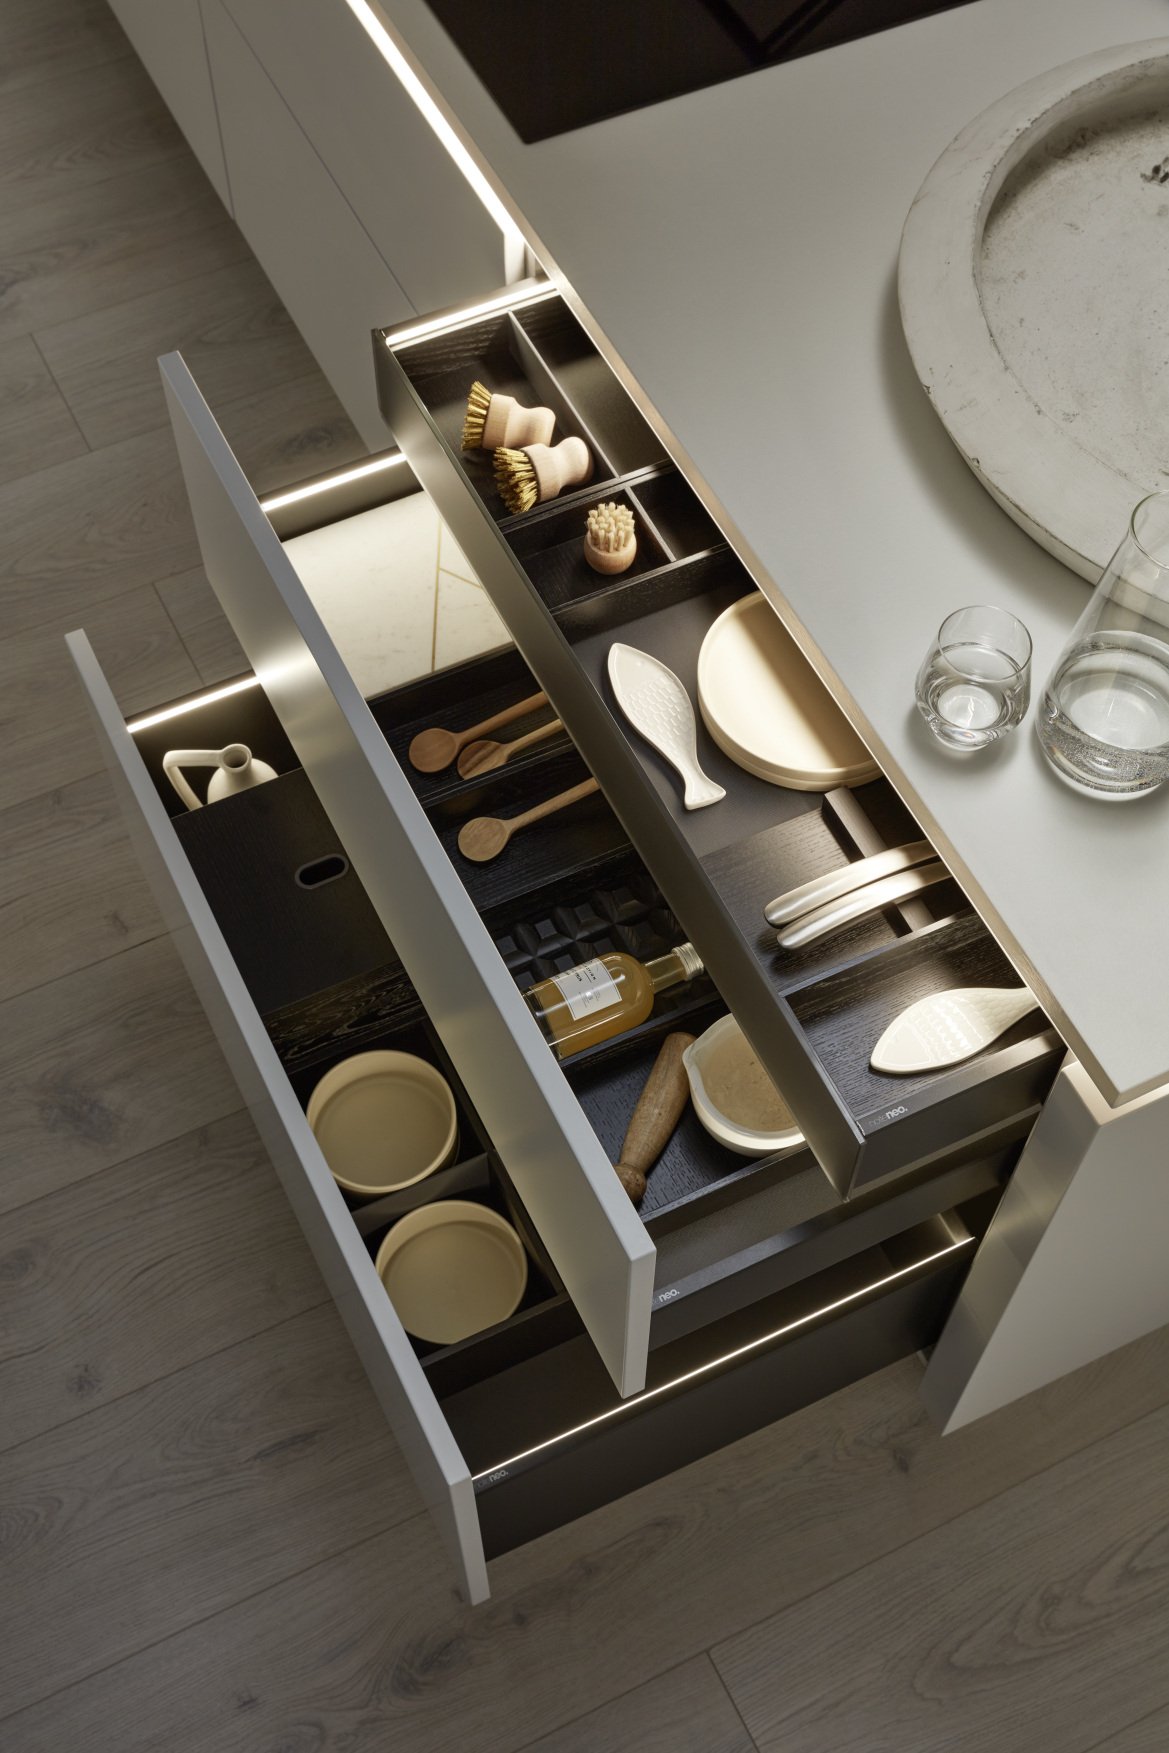 7 Haus and Nolte Küchen's Exclusive Line brings Well-Appointed Innovation To The Kitchen